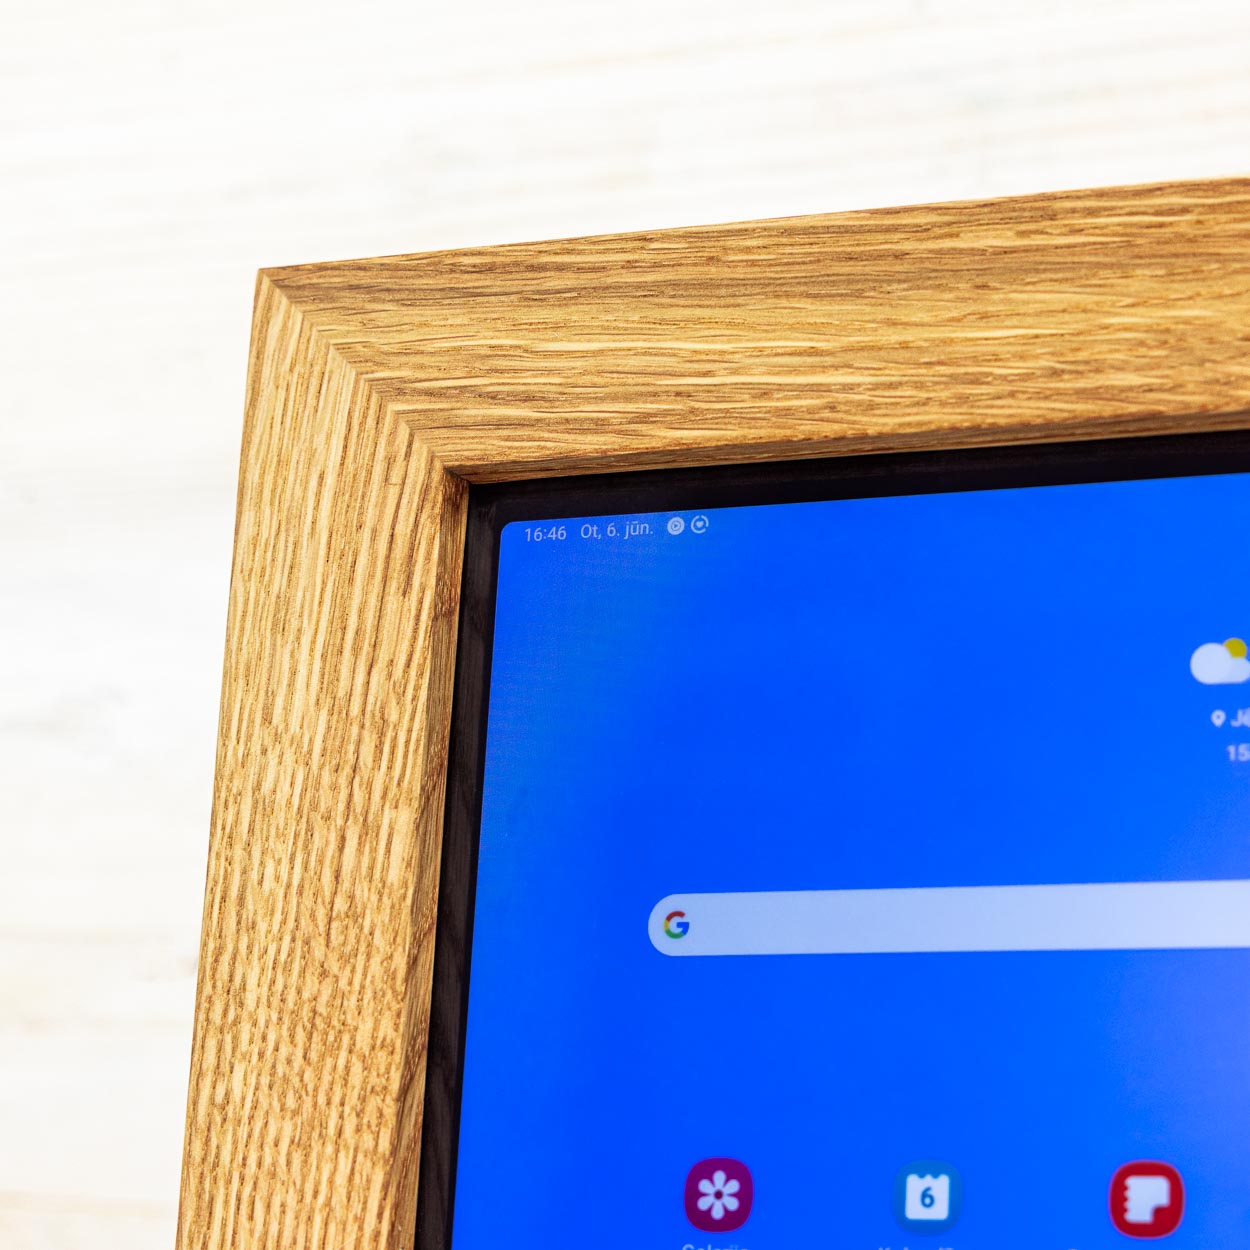 Hardwood, Strong joints for your Samsung frame